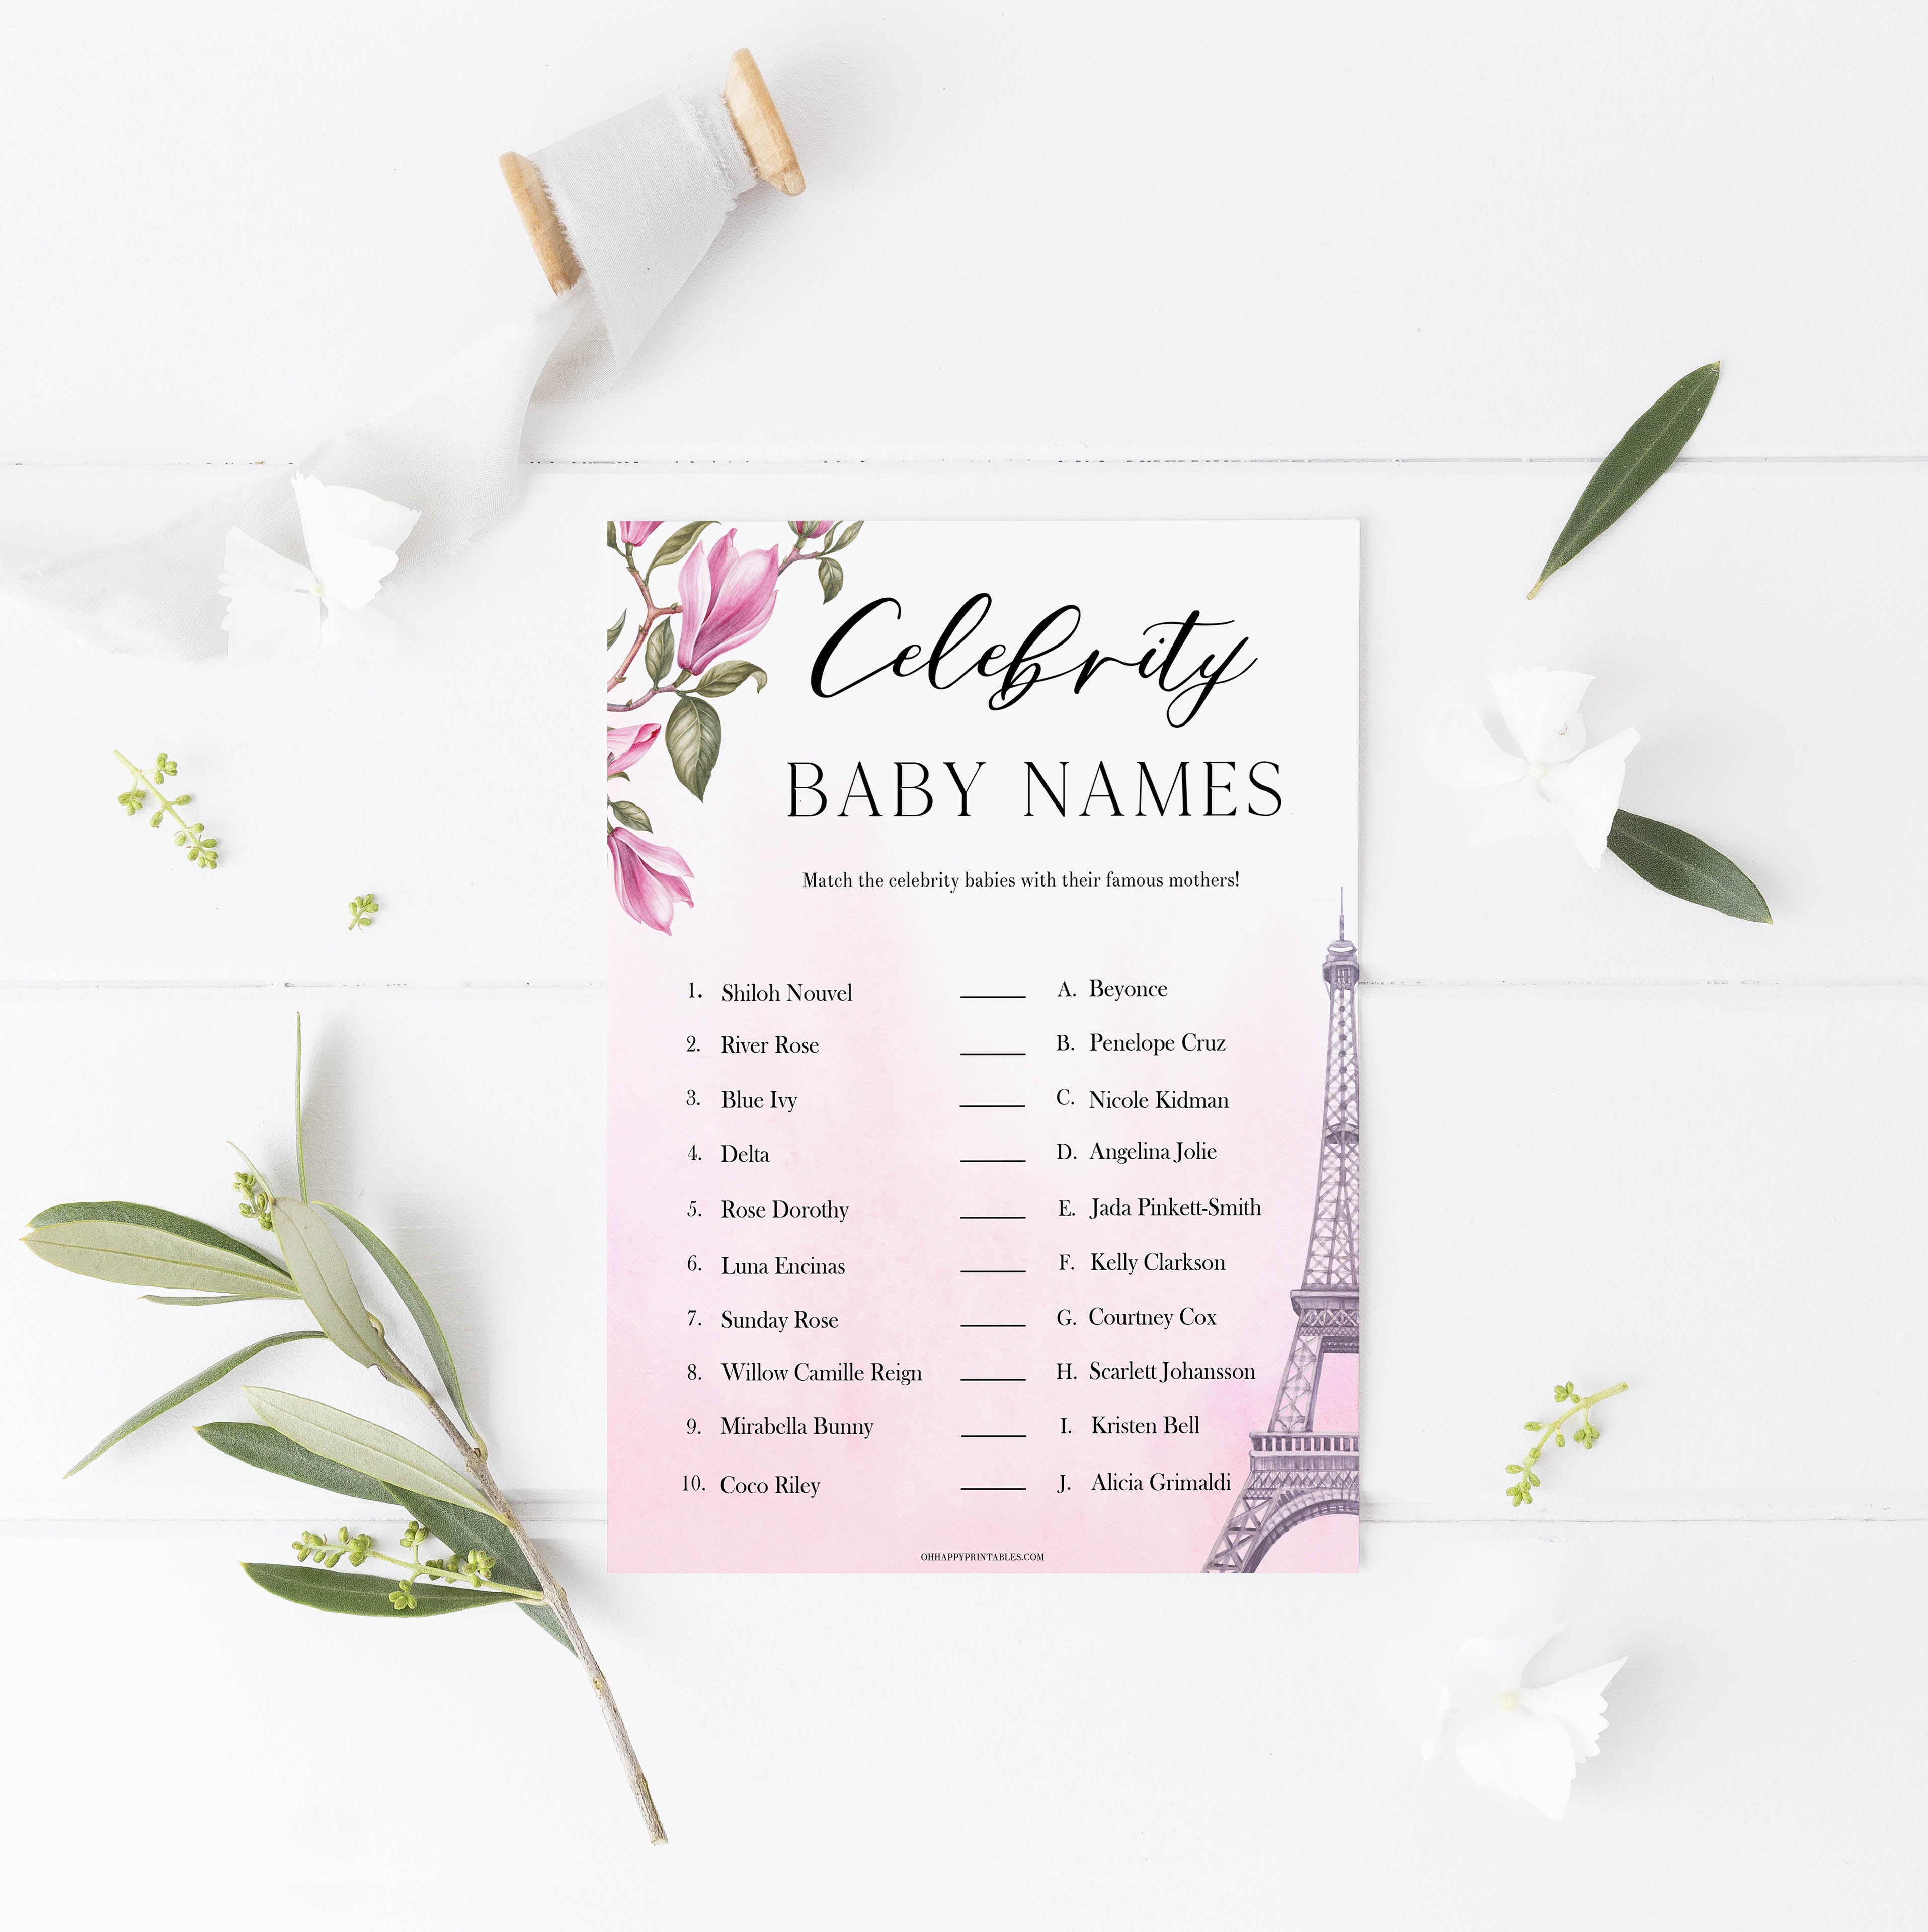 celebrity baby names game,  Paris baby shower games, printable baby shower games, Parisian baby shower games, fun baby shower games